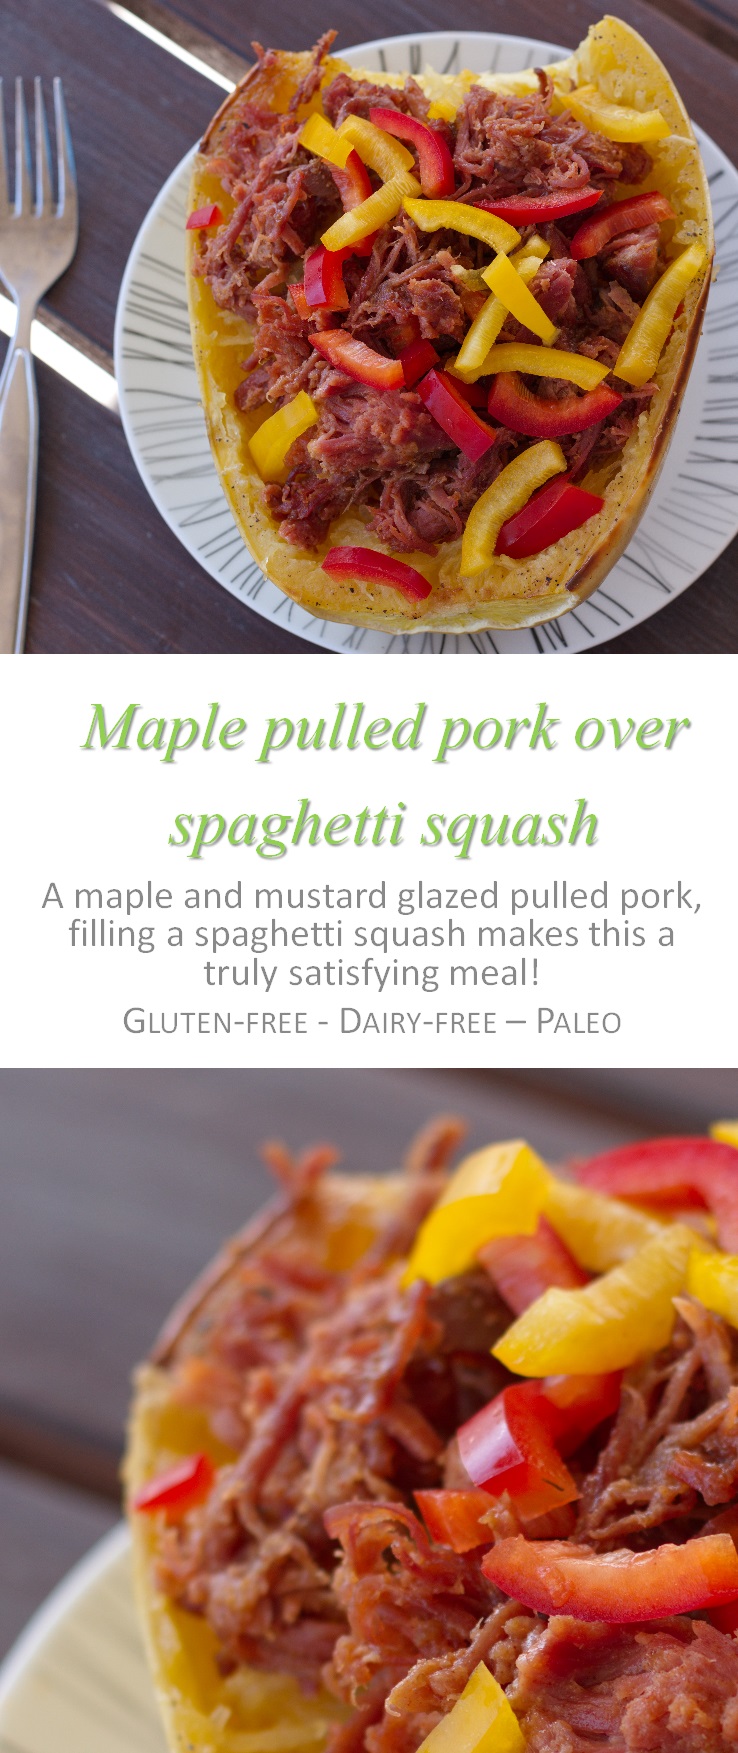 A decadent maple glaze with pulled pork, all in a spaghetti squash - what’s not to love? #maple #pork #cookathome #glutenfree #dairyfree #paleo